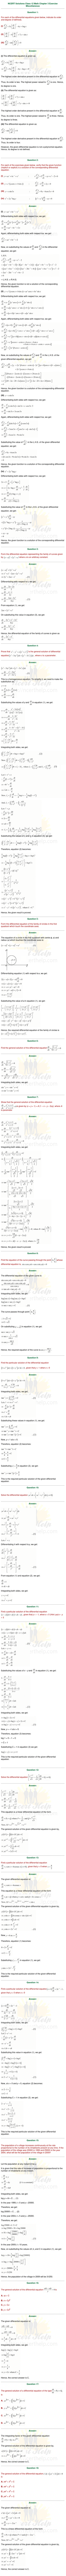 ncert solutions for class 12 Math Chapter 9 Miscellaneous 